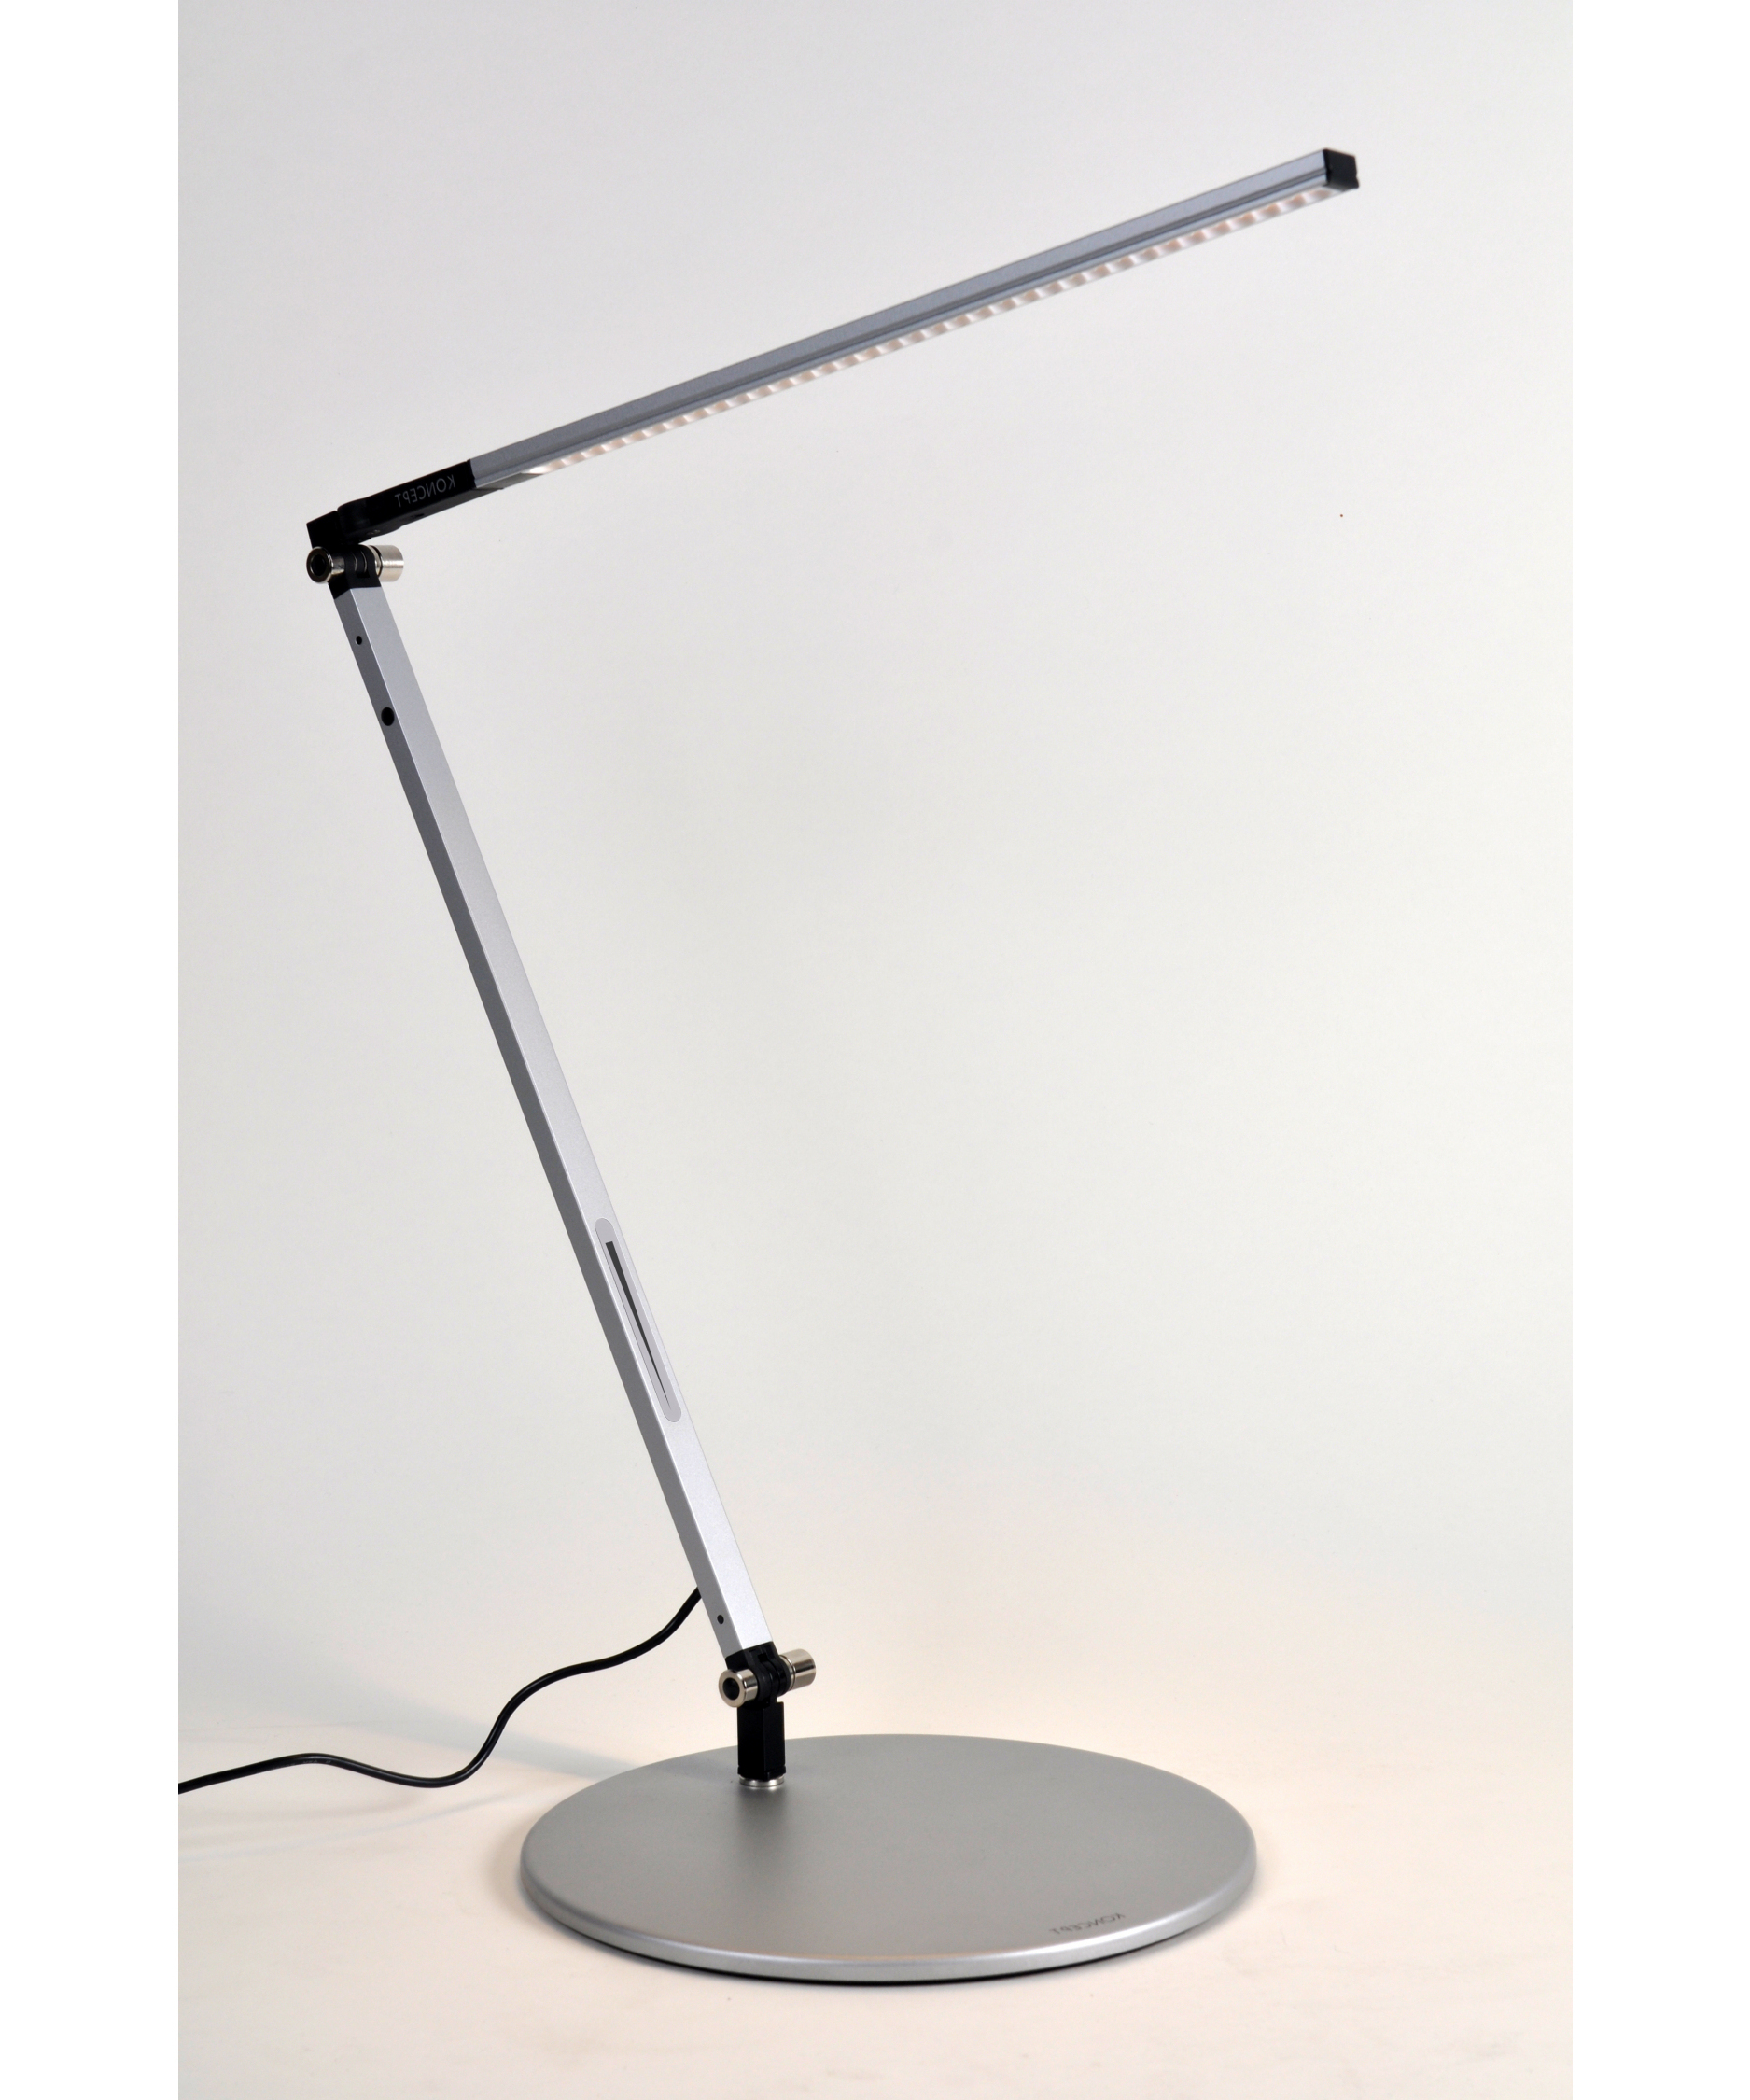 Best Desk Lamp For Studying Uk Lamp Design Ideas throughout measurements 1875 X 2250